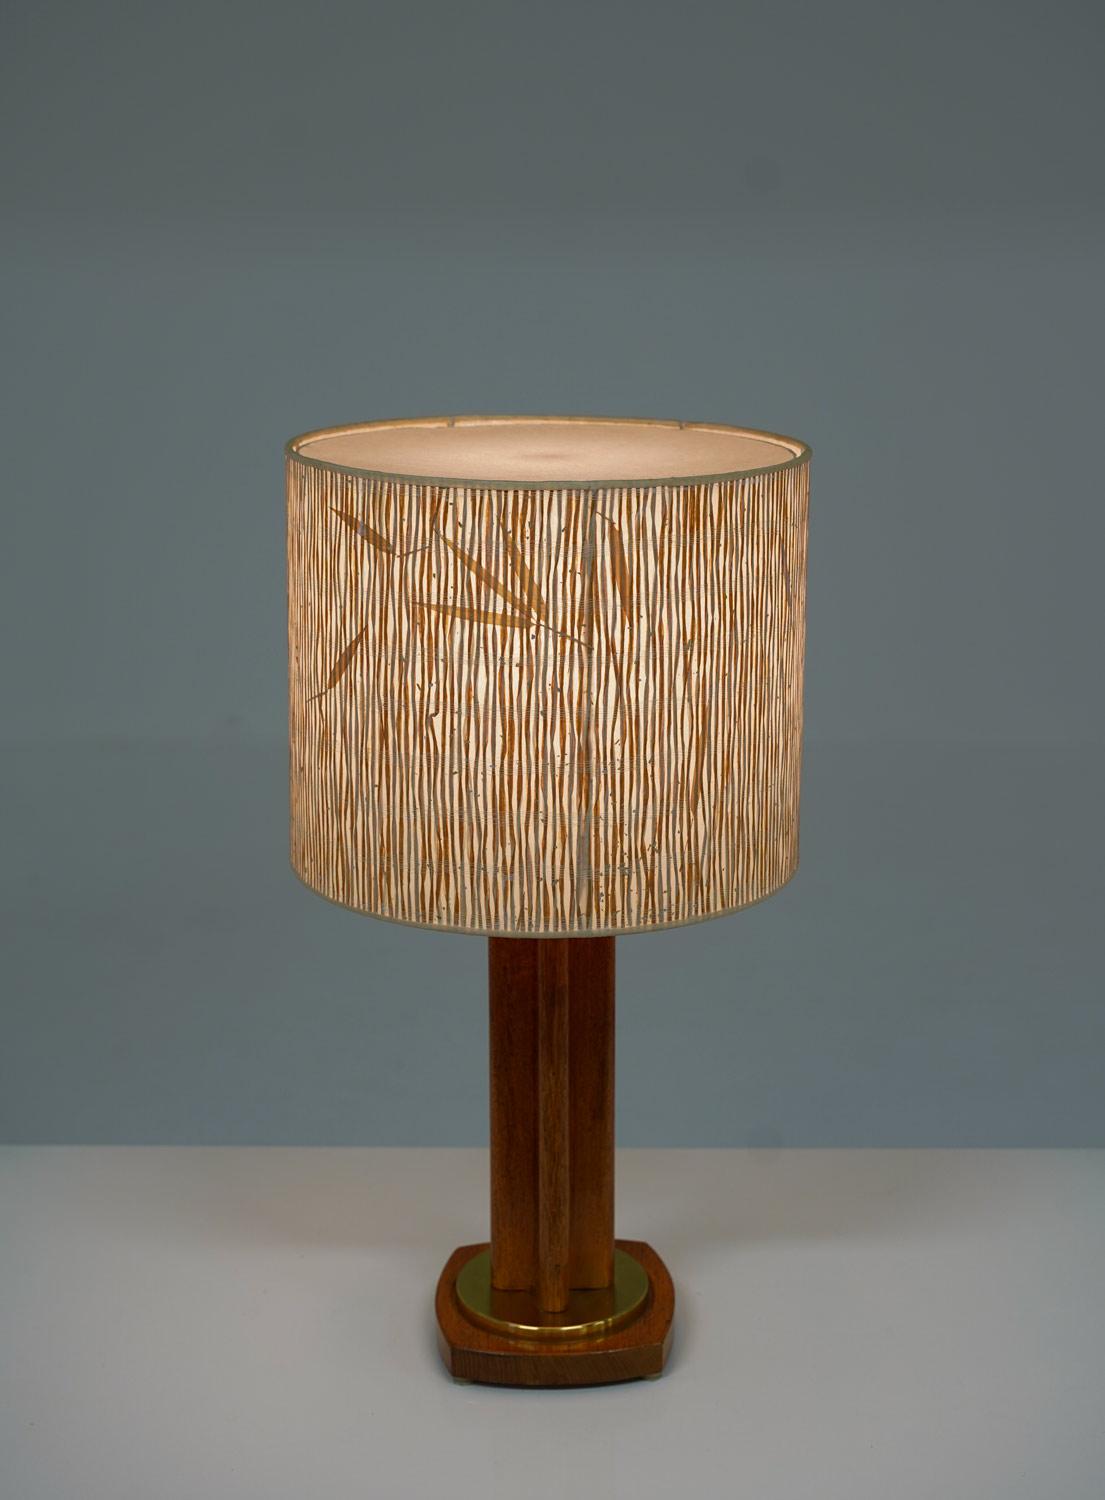 Scandinavian Midcentury Table Lamp in Oak and Brass by MAE, Sweden For Sale 2